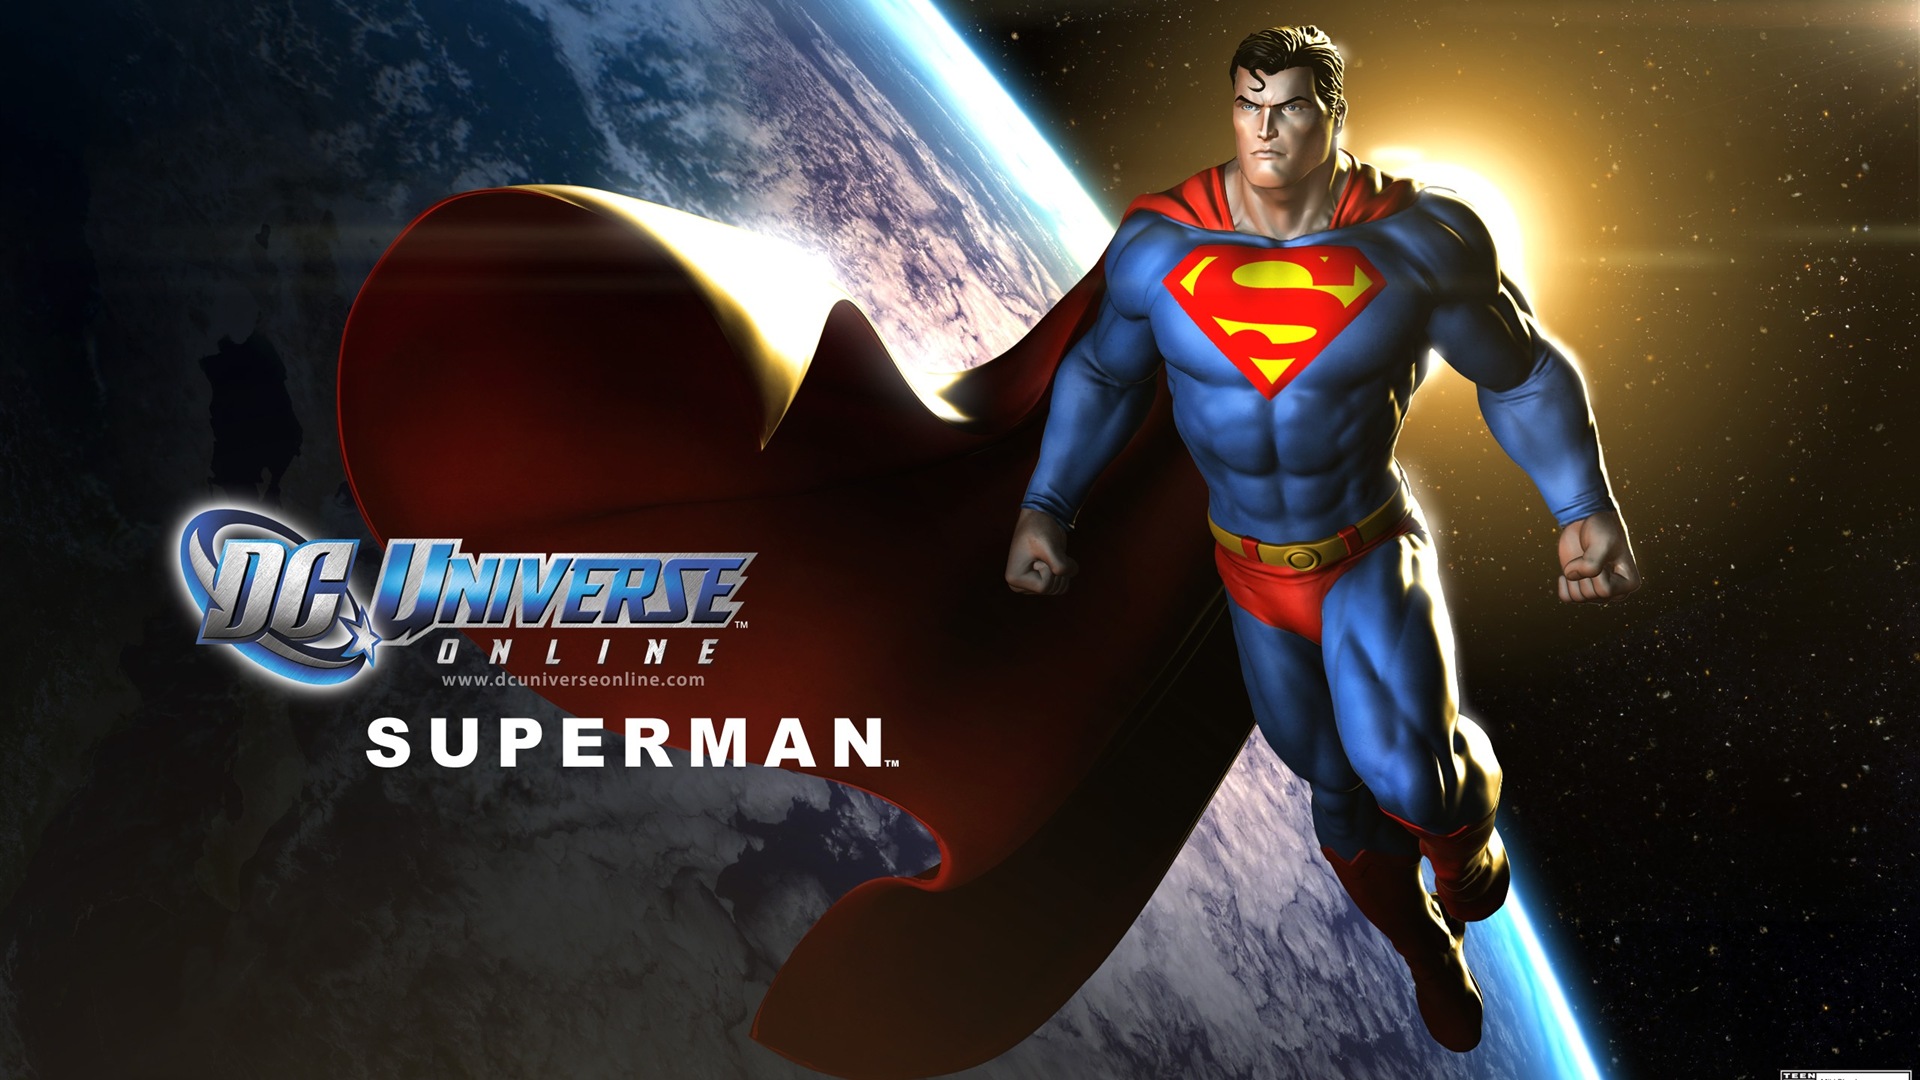 DC Universe Online HD game wallpapers #9 - 1920x1080